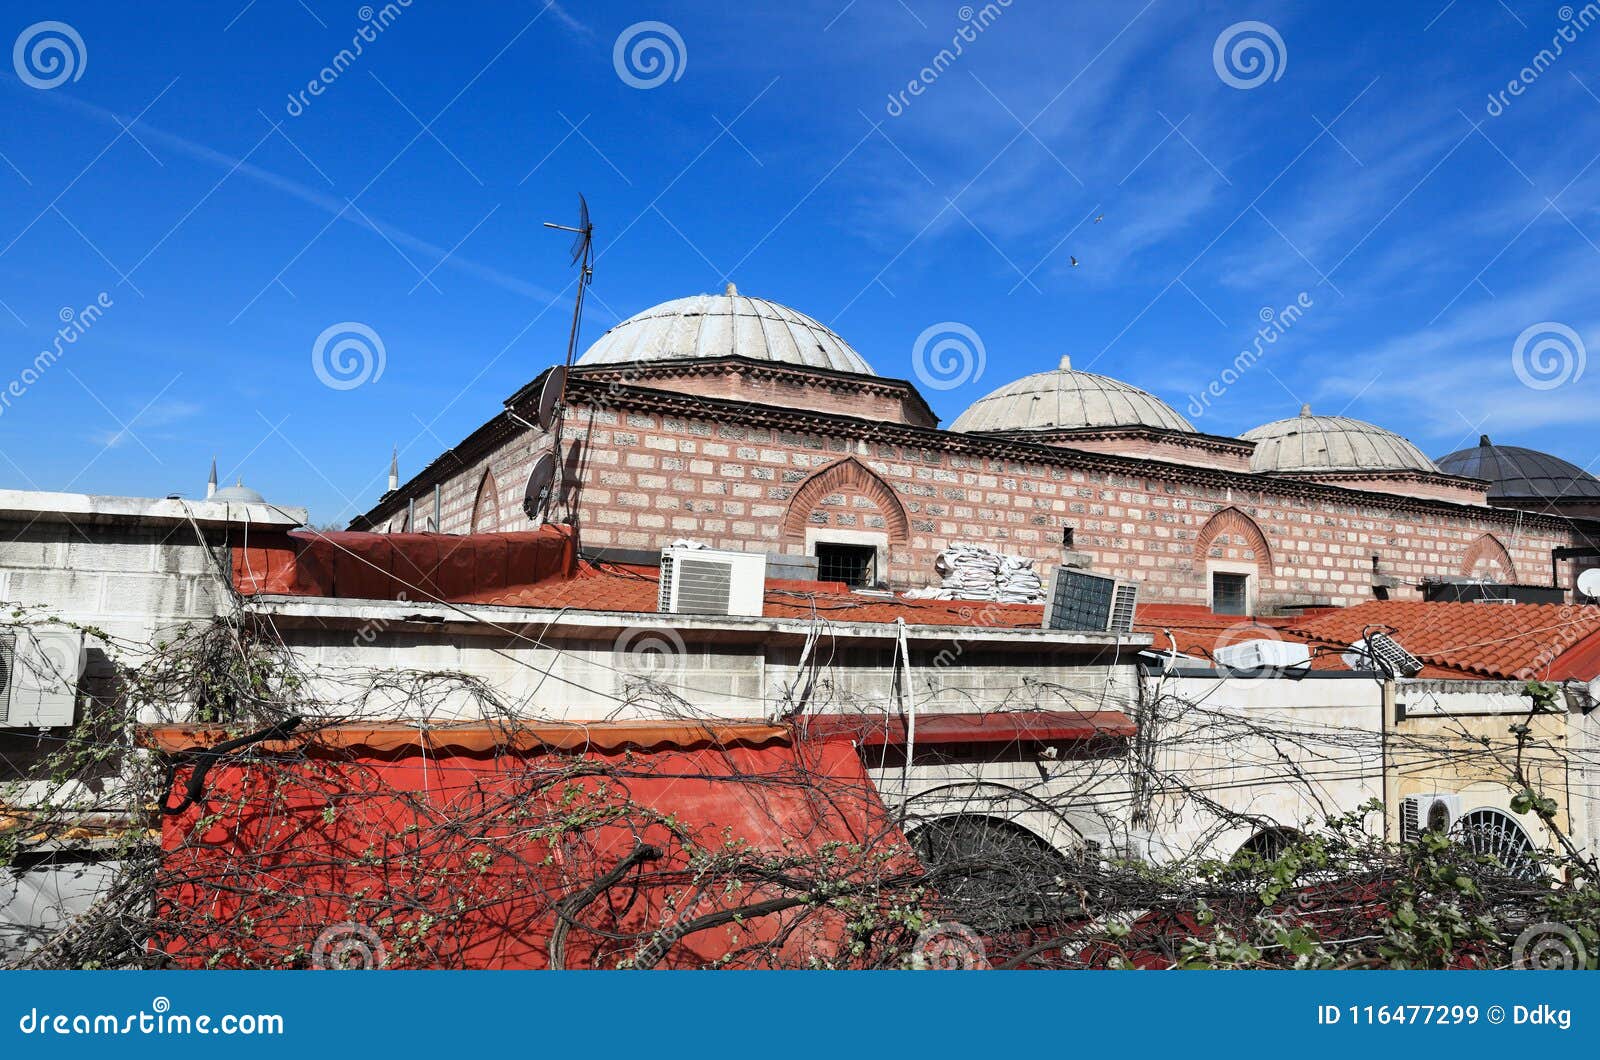 Istanbul Domed Roof Of The Grand Bazaar Stock Image Image of destination, domes 116477299